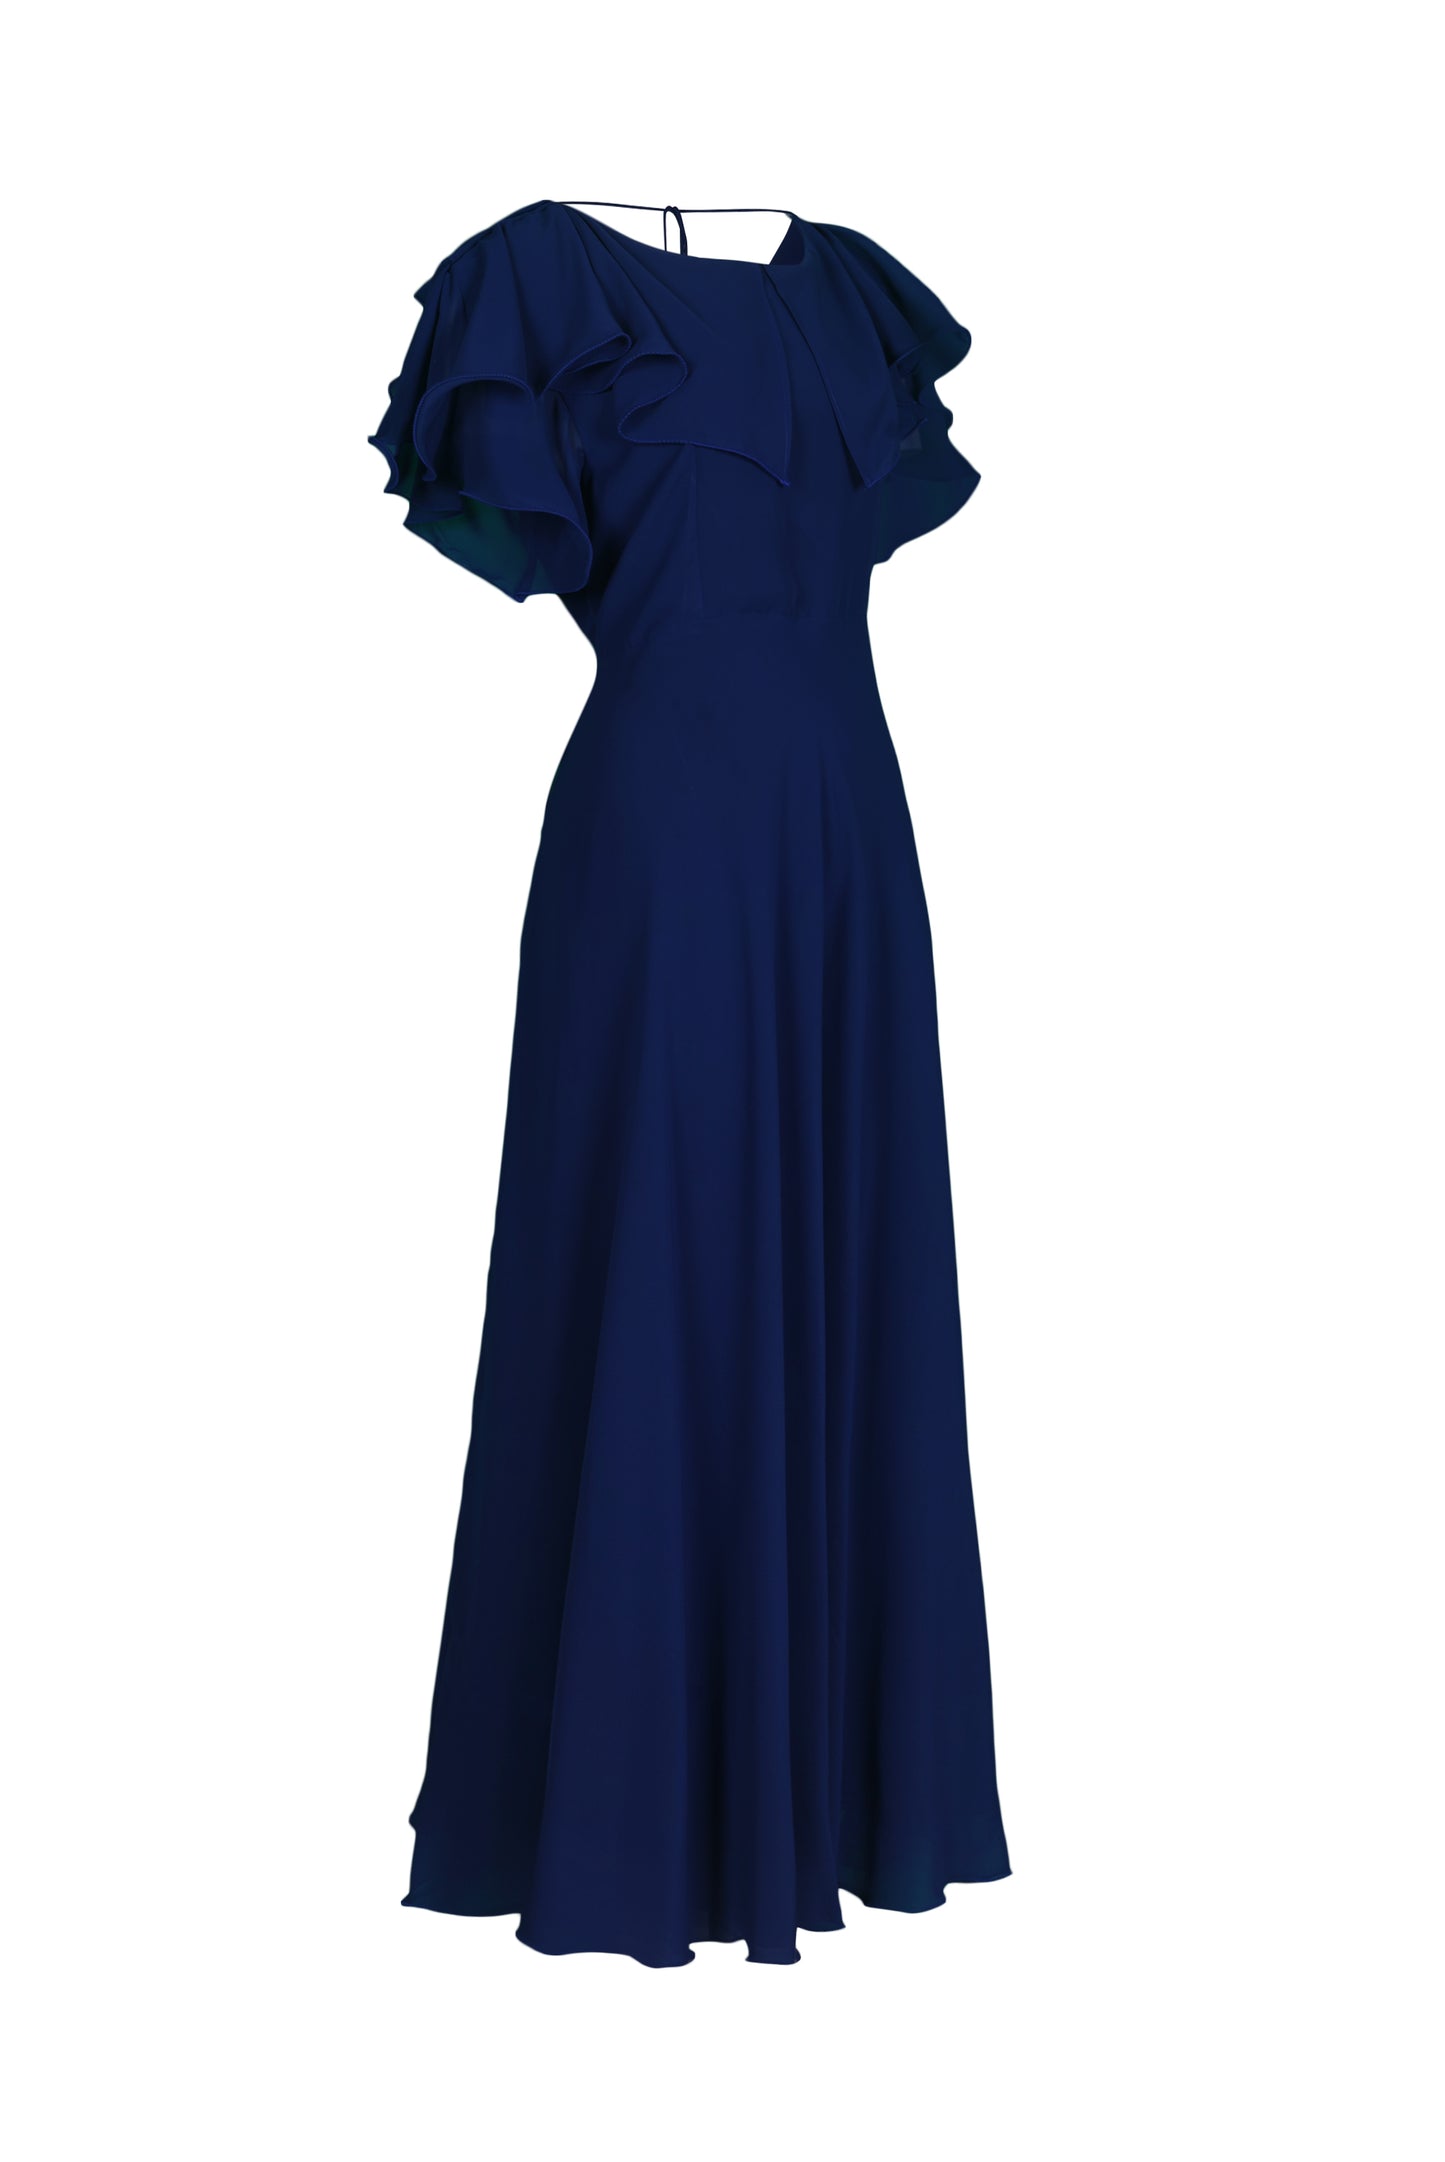 ZIA030 Flared Royal Blue Georgette gown